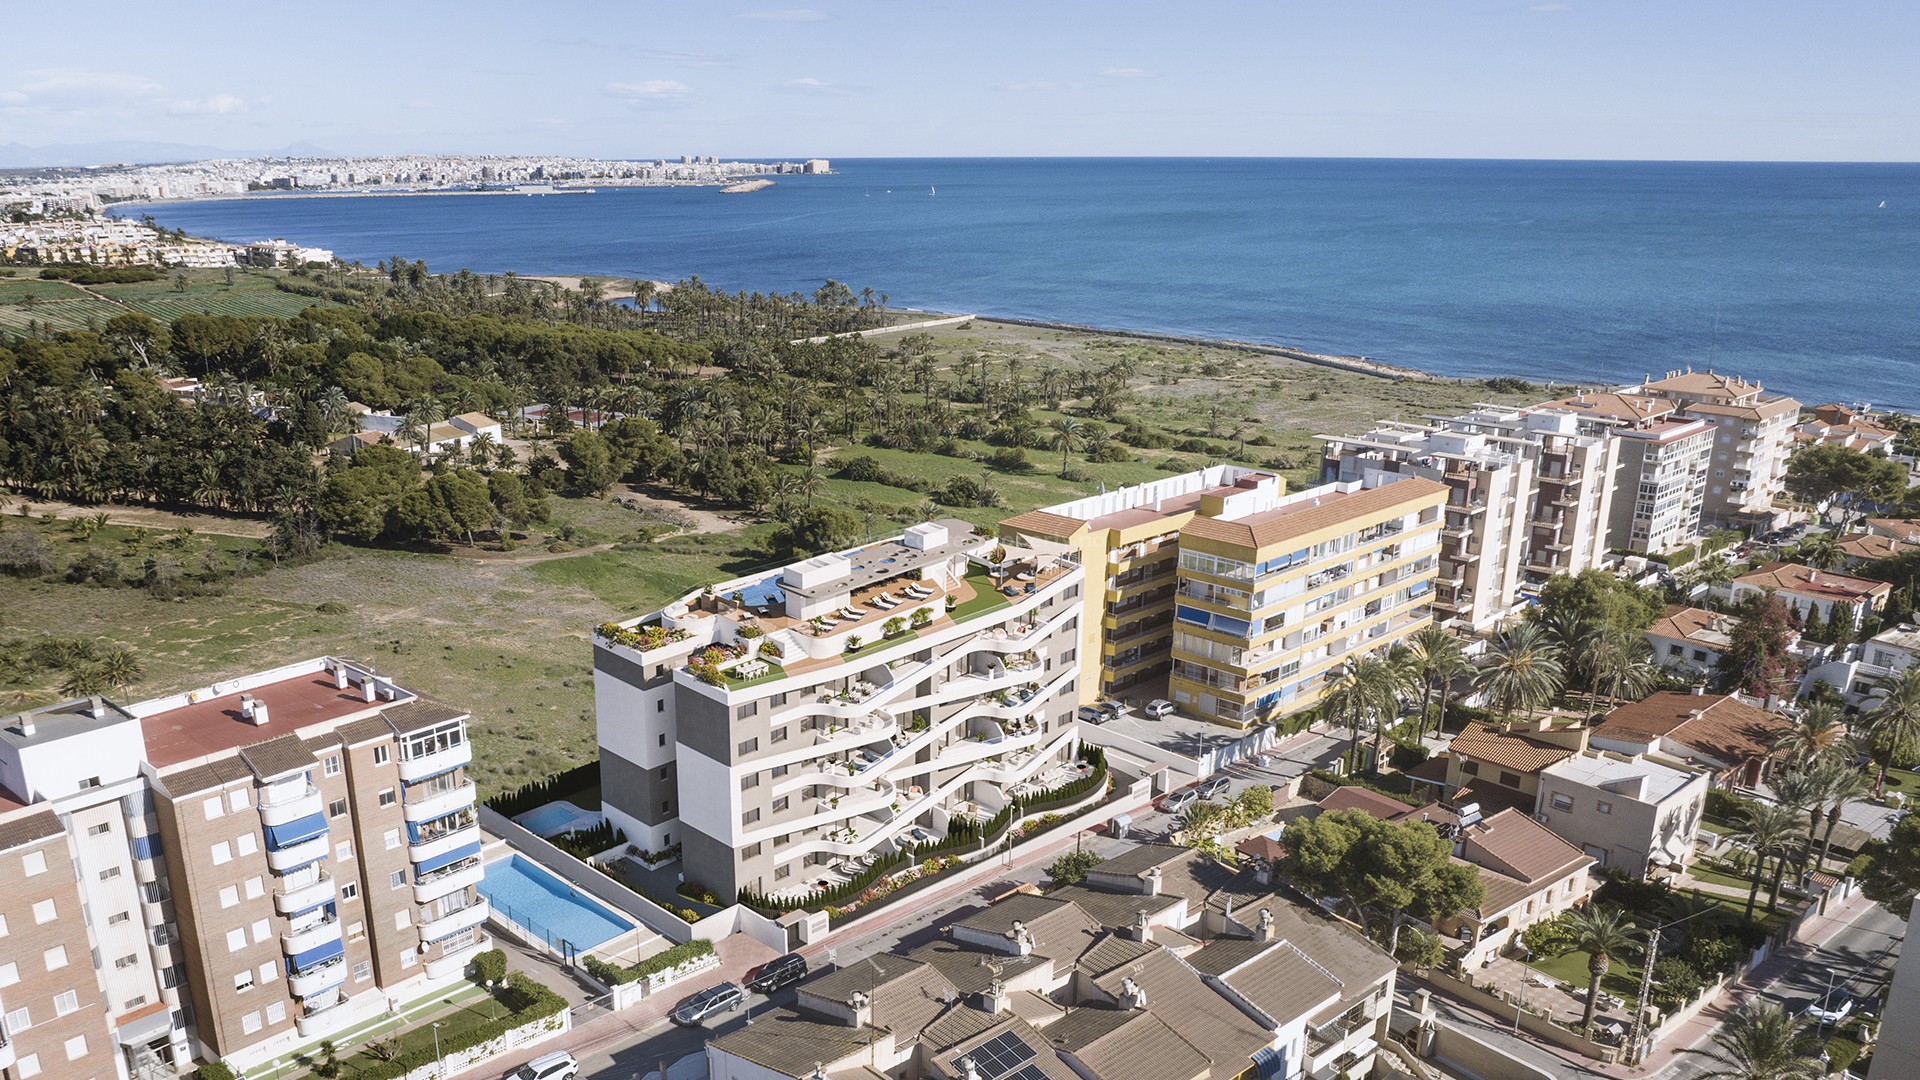 Apartments in Punta Prima, Torrevieja, 2/3 bedrooms, 2 bathrooms, terrace or garden, infinity pool, hot tub, many apartments with fantastic views